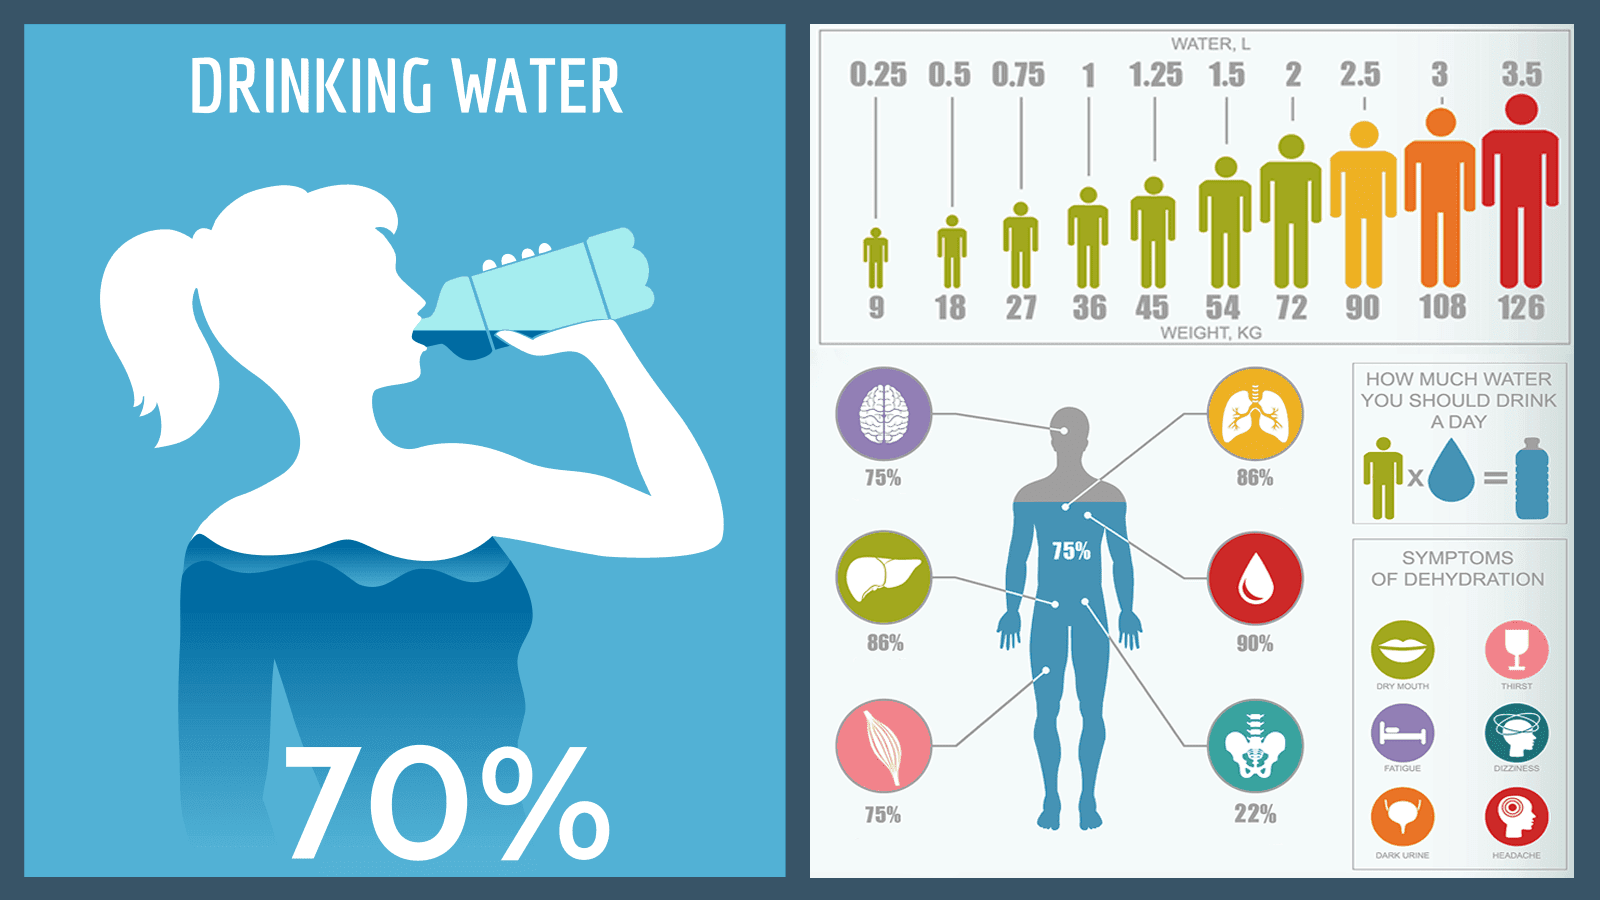 How Much Water Should You Drink Every Day, According to Your Weight?